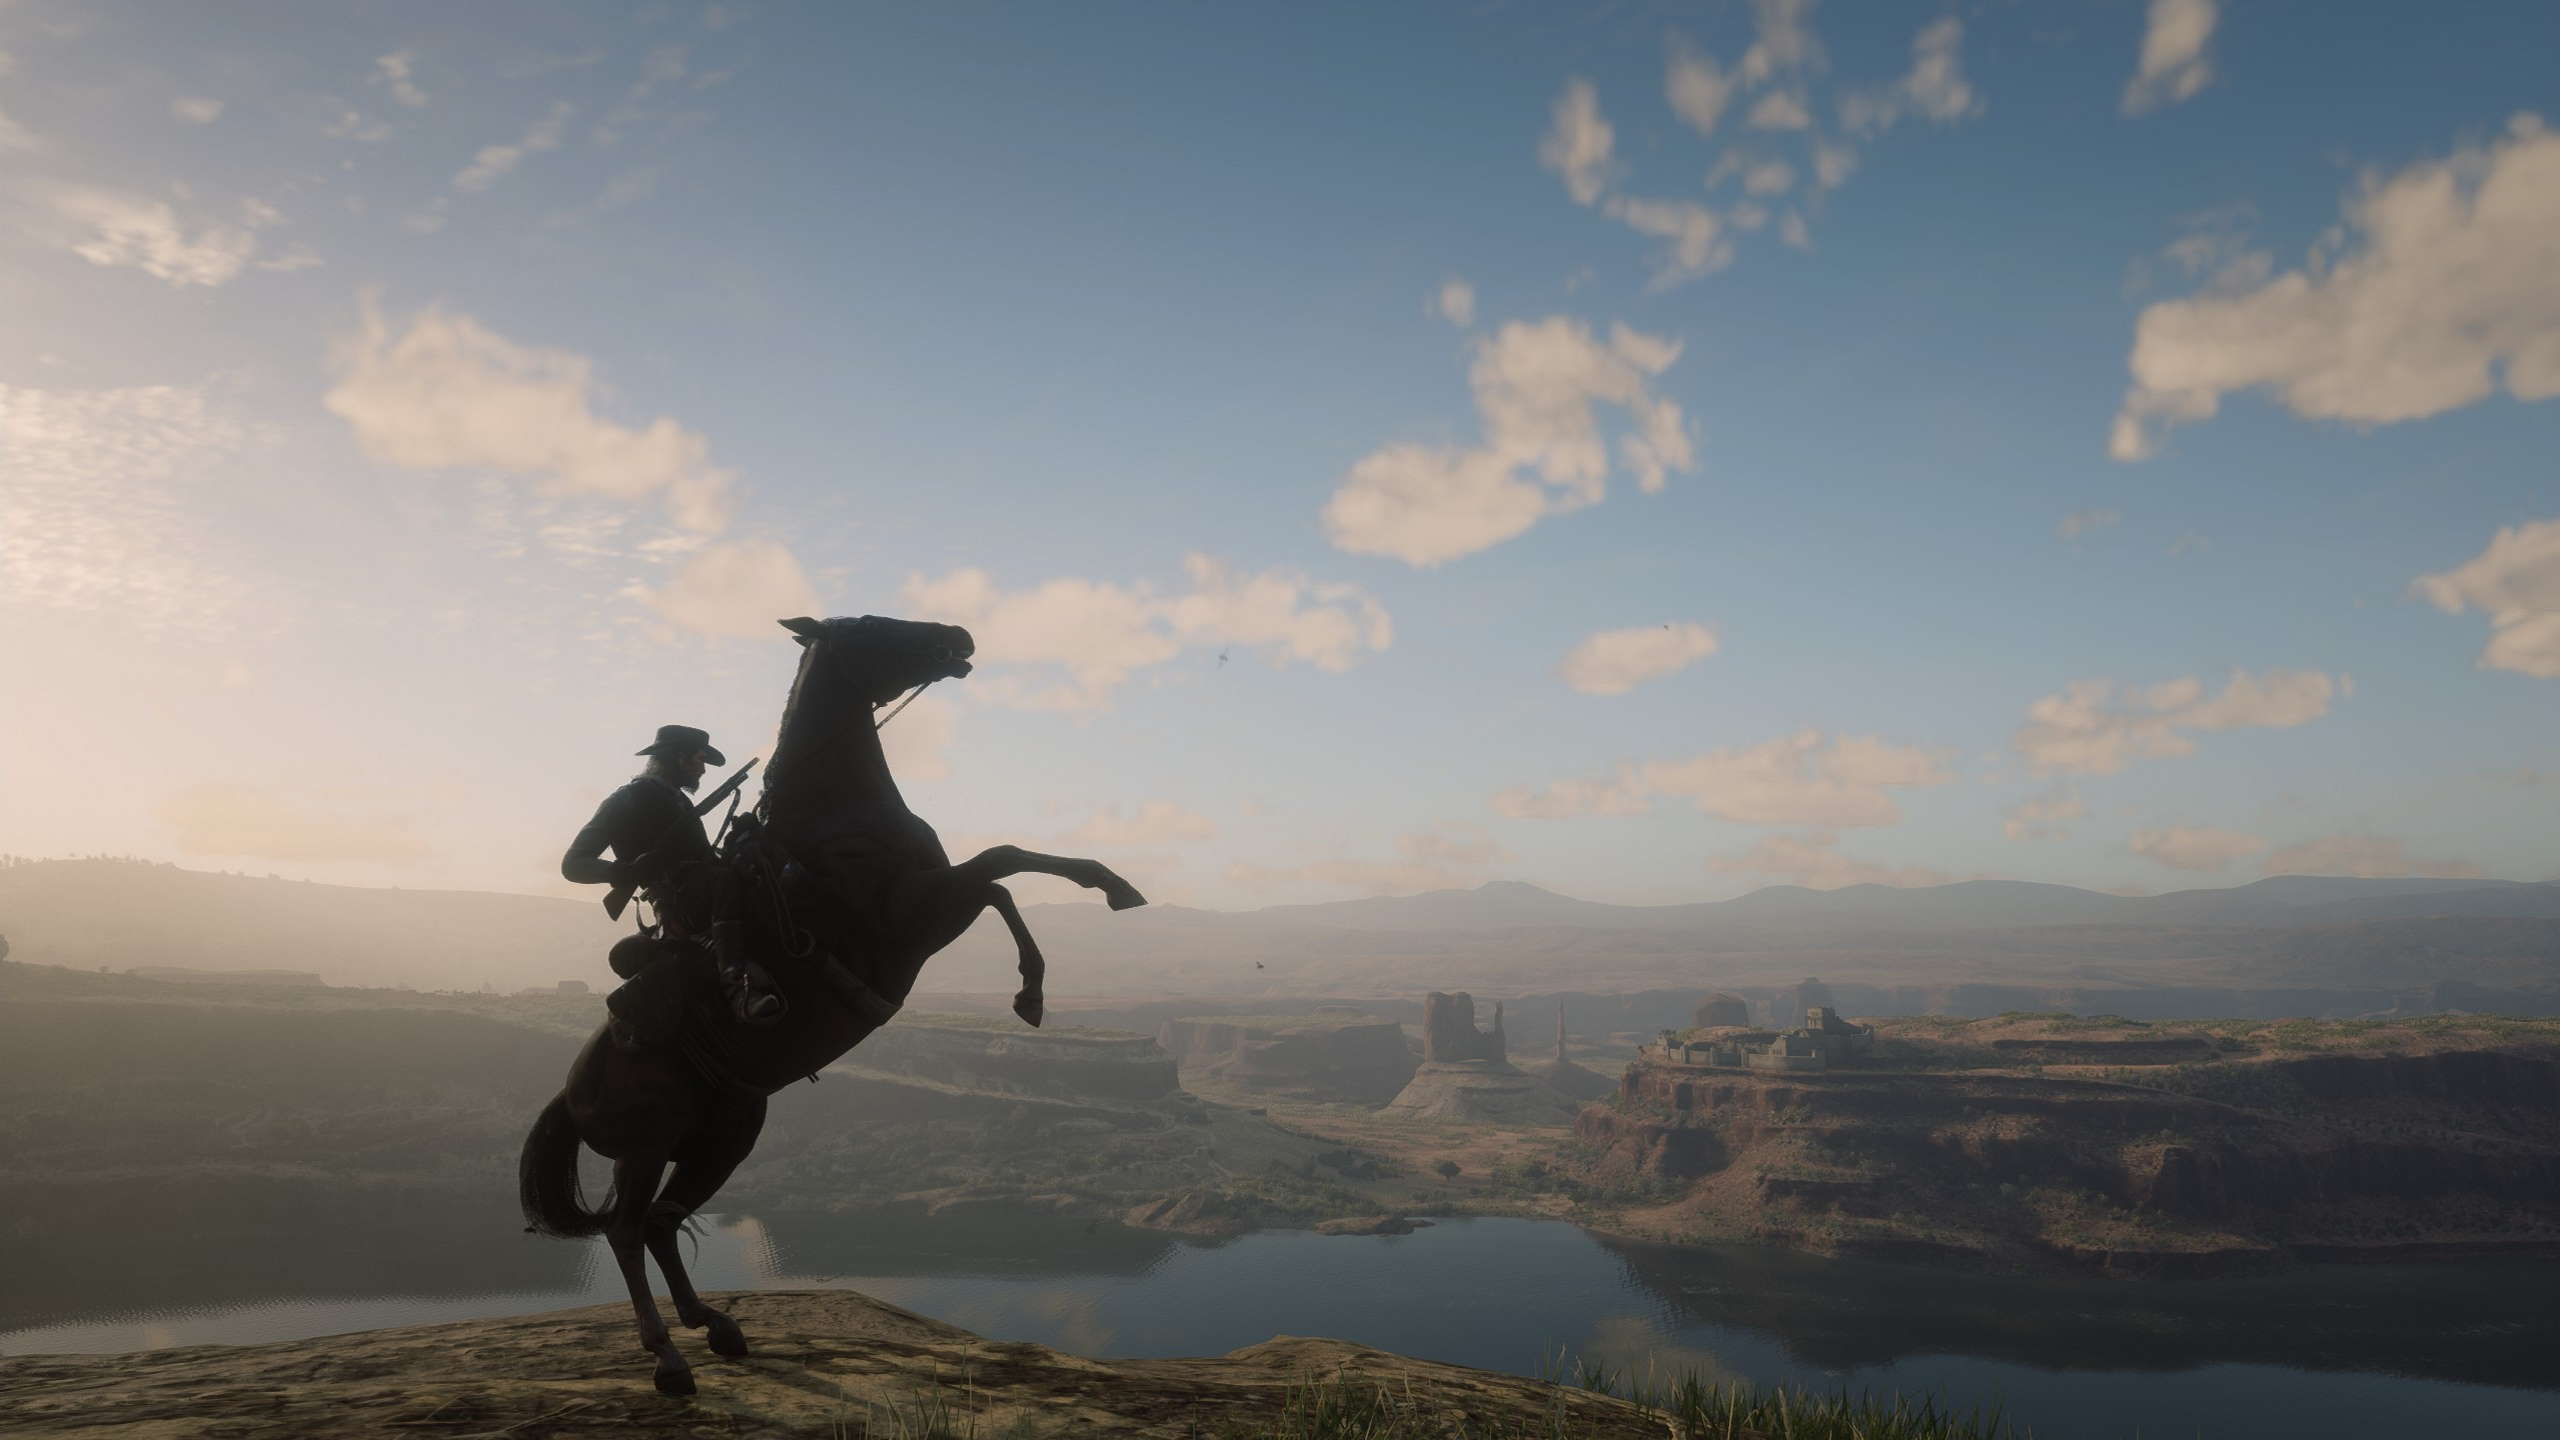 A beautiful vista in Red Dead Redemption 2 with a horse in the foreground running on Nvidia graphics with DLSS